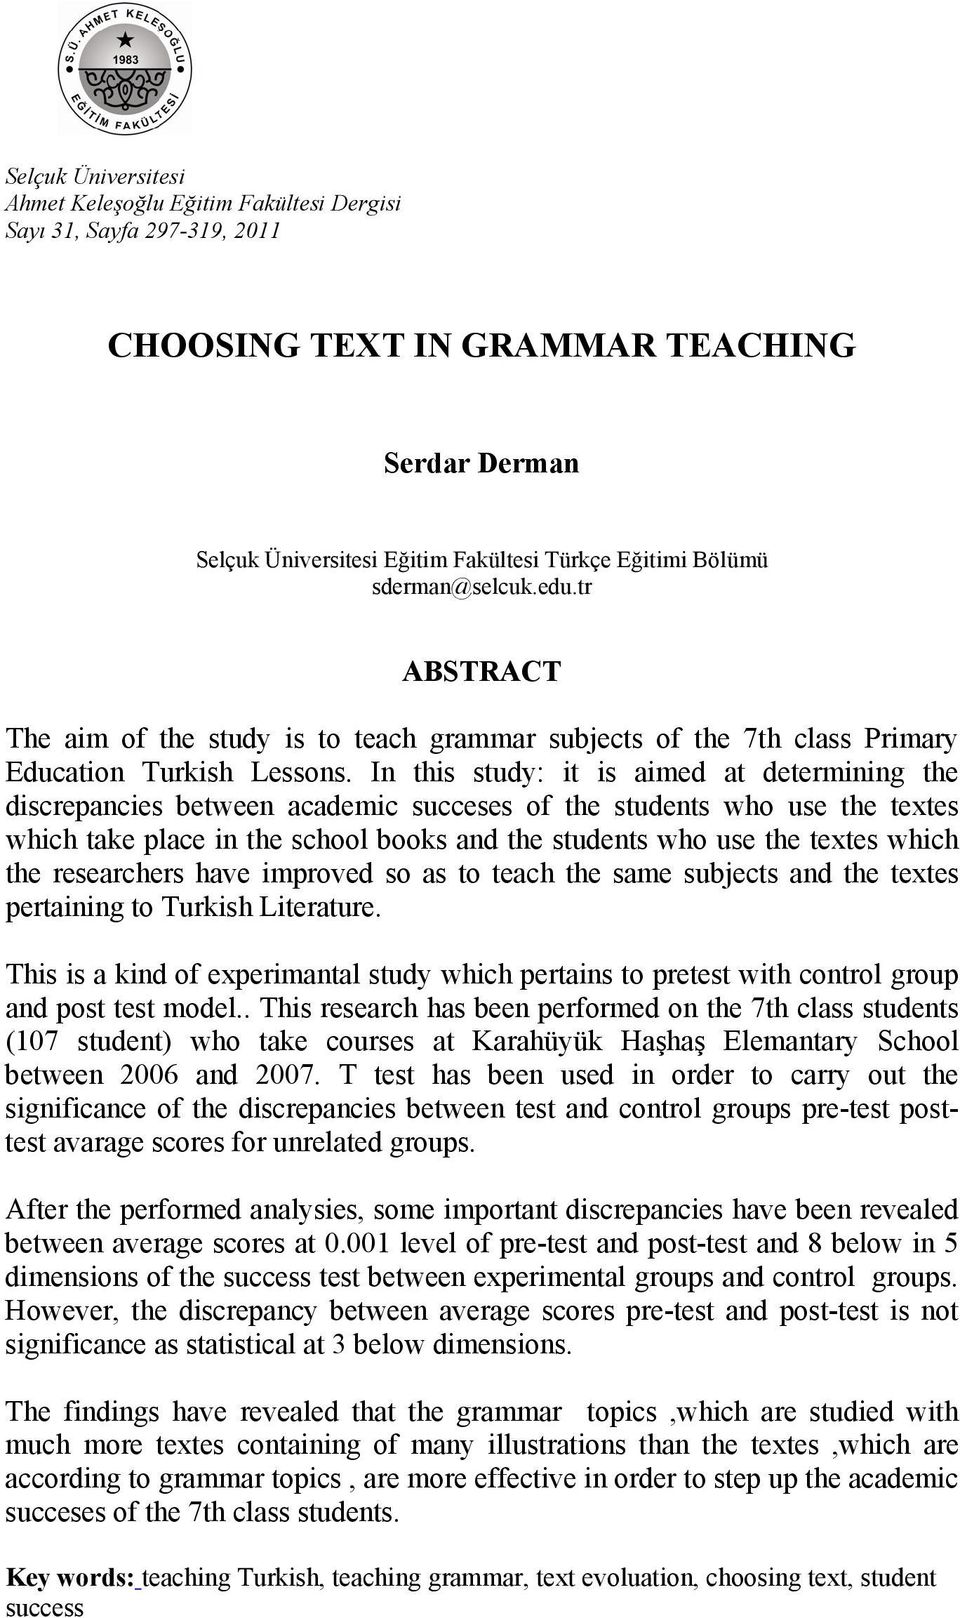 In this study: it is aimed at determining the discreancies between academic succeses of the students who use the textes which take lace in the school books and the students who use the textes which